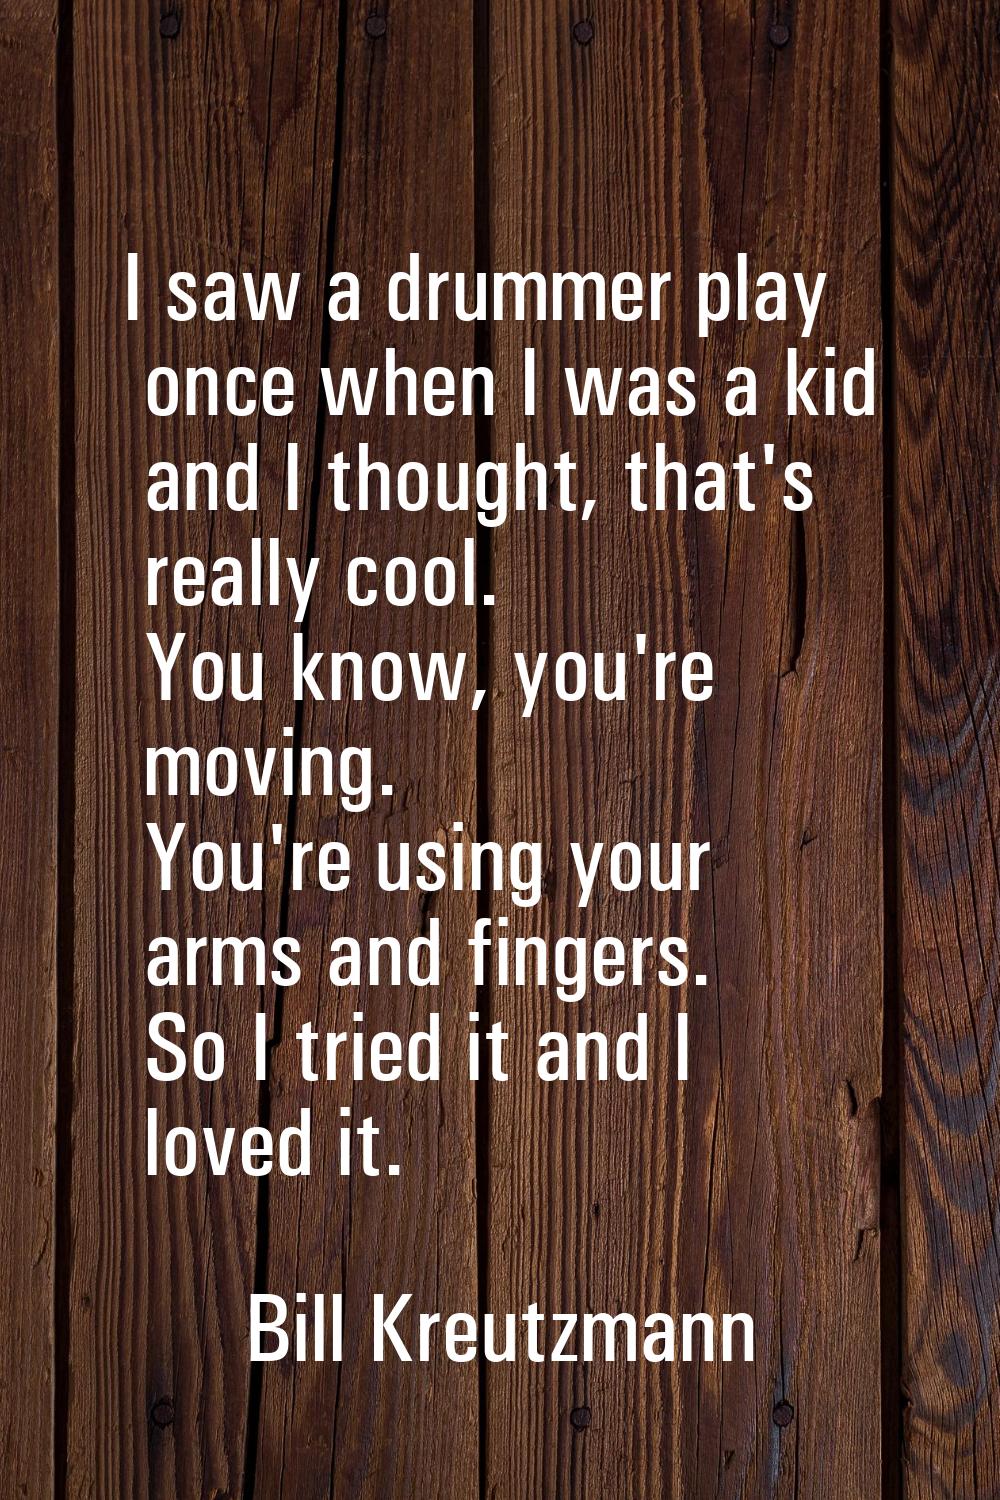 I saw a drummer play once when I was a kid and I thought, that's really cool. You know, you're movi